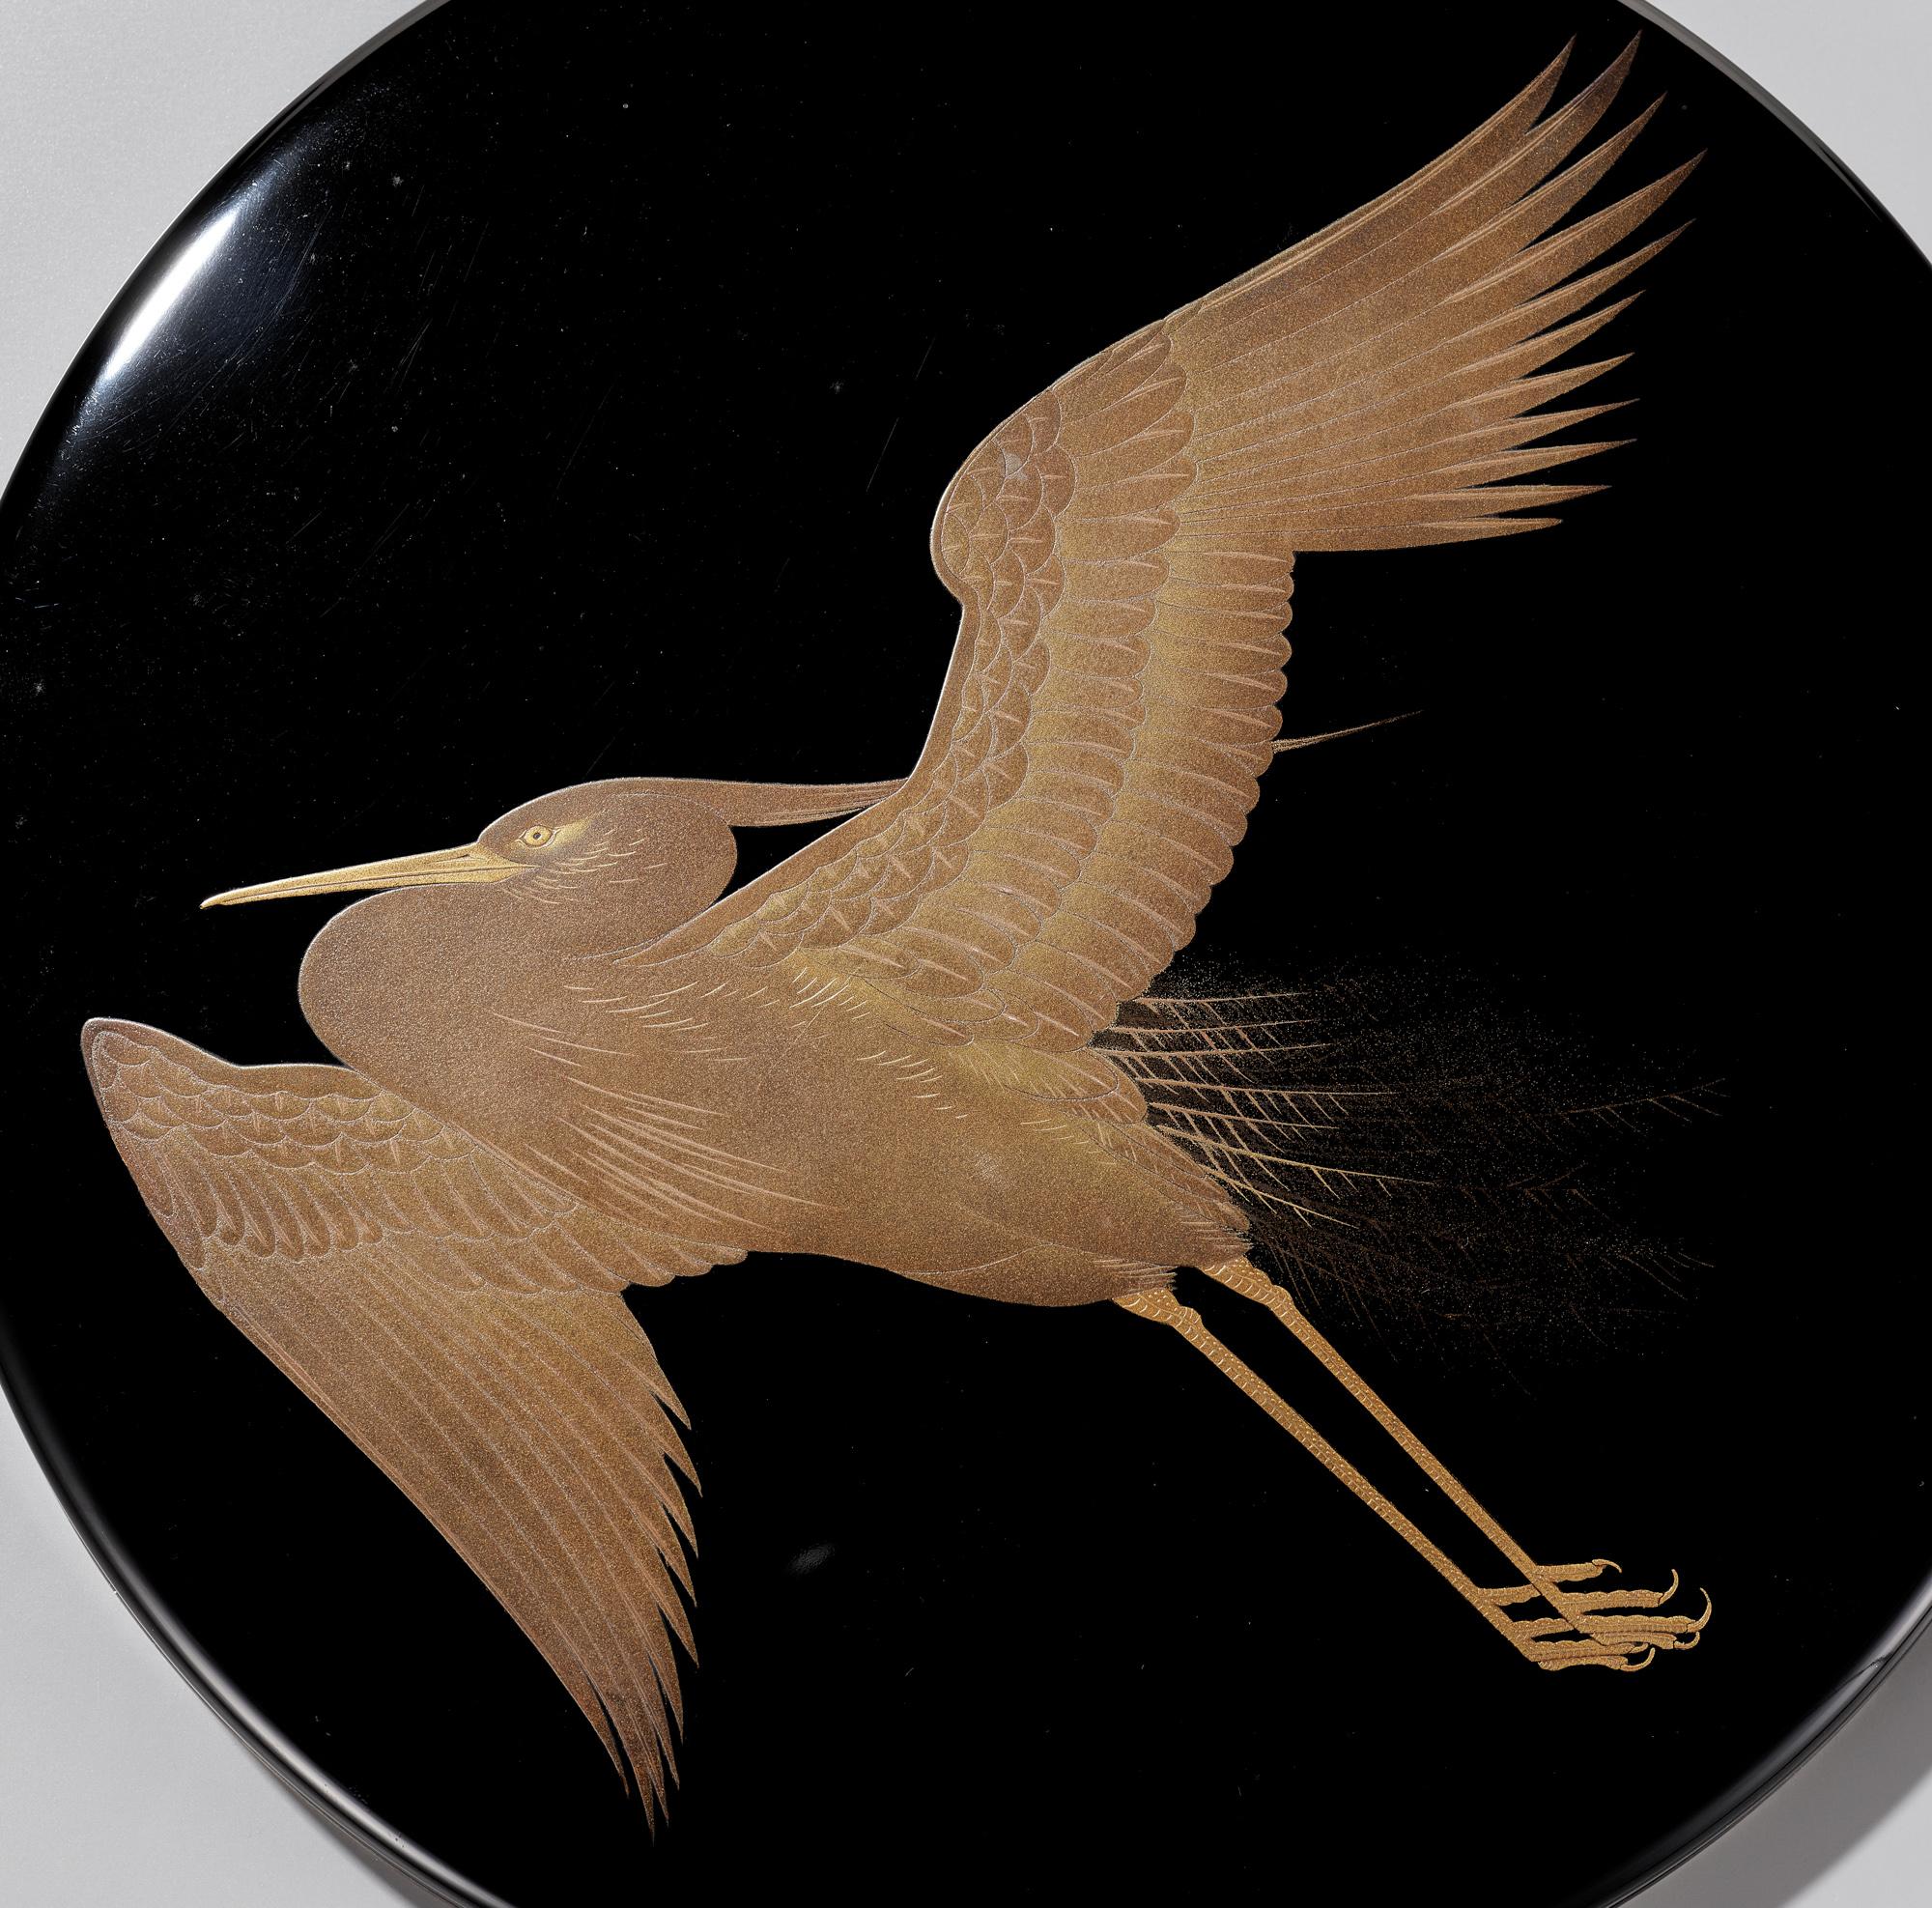 An exquisite lacquer suzuri’bako (writing box) of circular form depicting a flying heron (shirasagi) with its wings spread out.

The flush-fitting cover finished with a rim of silver, and its motif executed in takamaki-e (high-relief lacquer design)